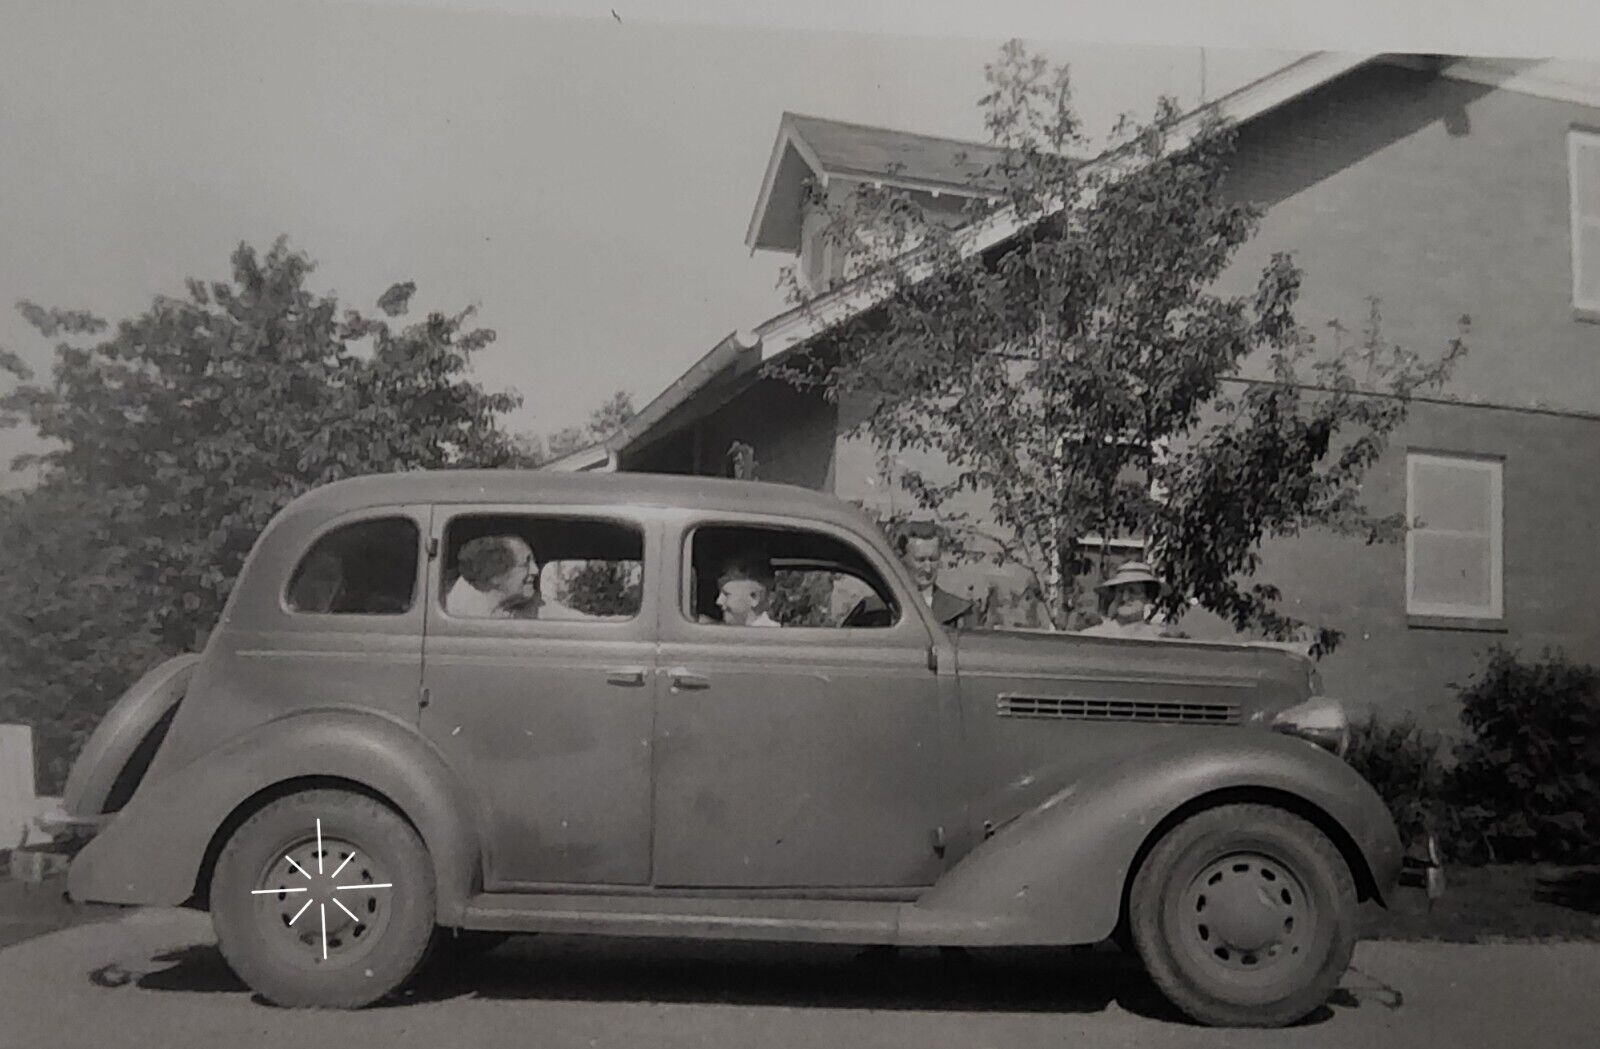 1937 CAR Pic  Vintage FOUND PHOTO Black And White Snapshot L1